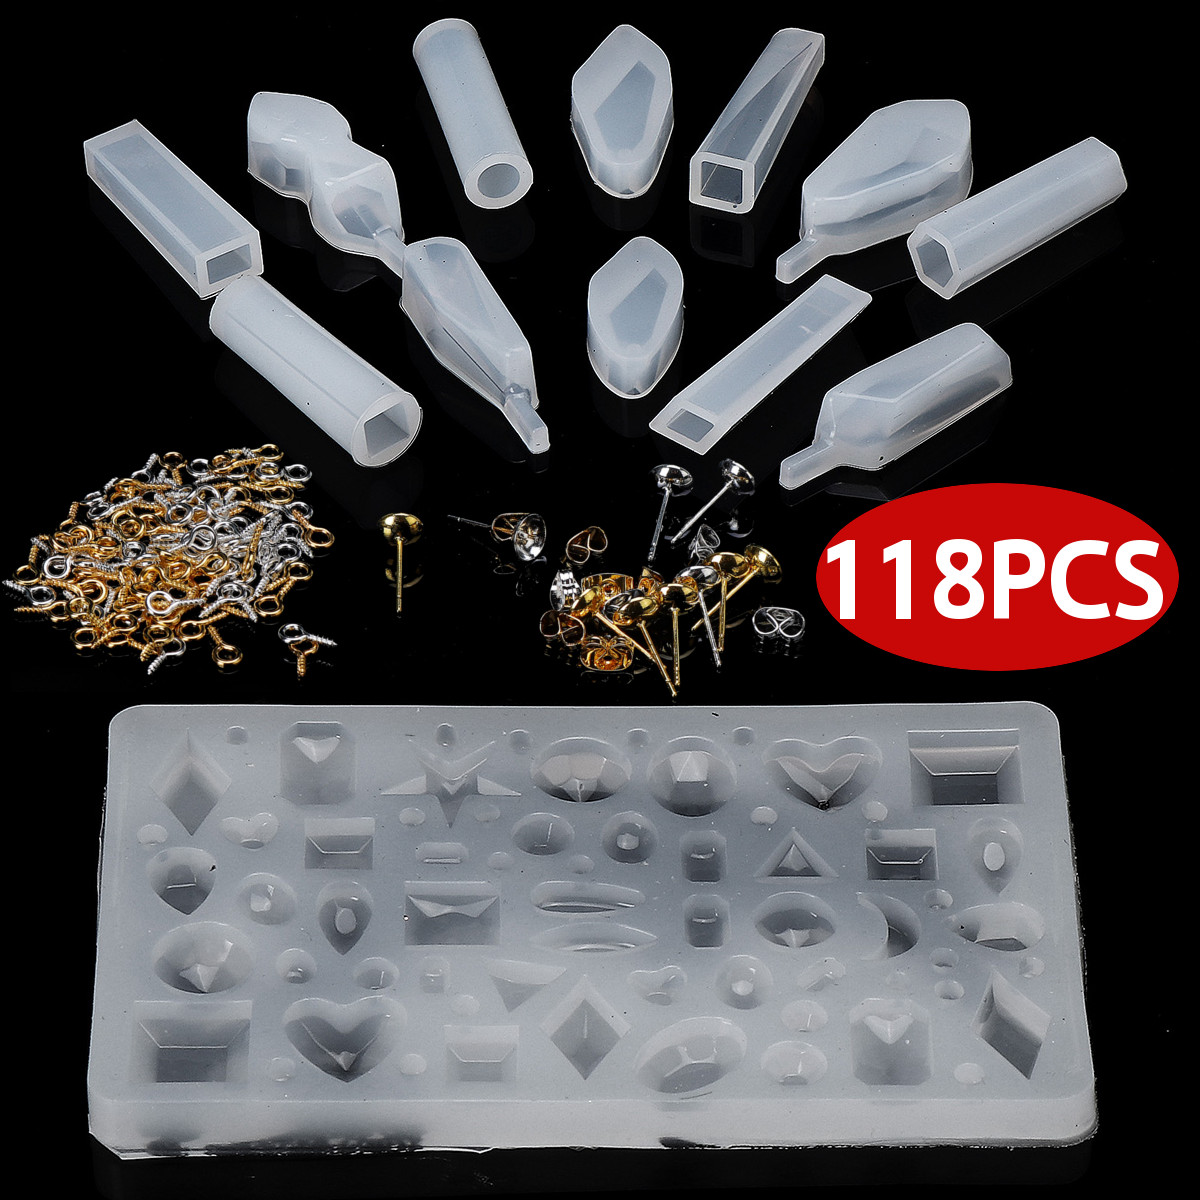 118PCS-DIY-Crystal-Glue-Resin-Silicone-Jewelry-Molds-Project-Gift-Pendant-Decoration-Mould-Tools-Set-1664749-2